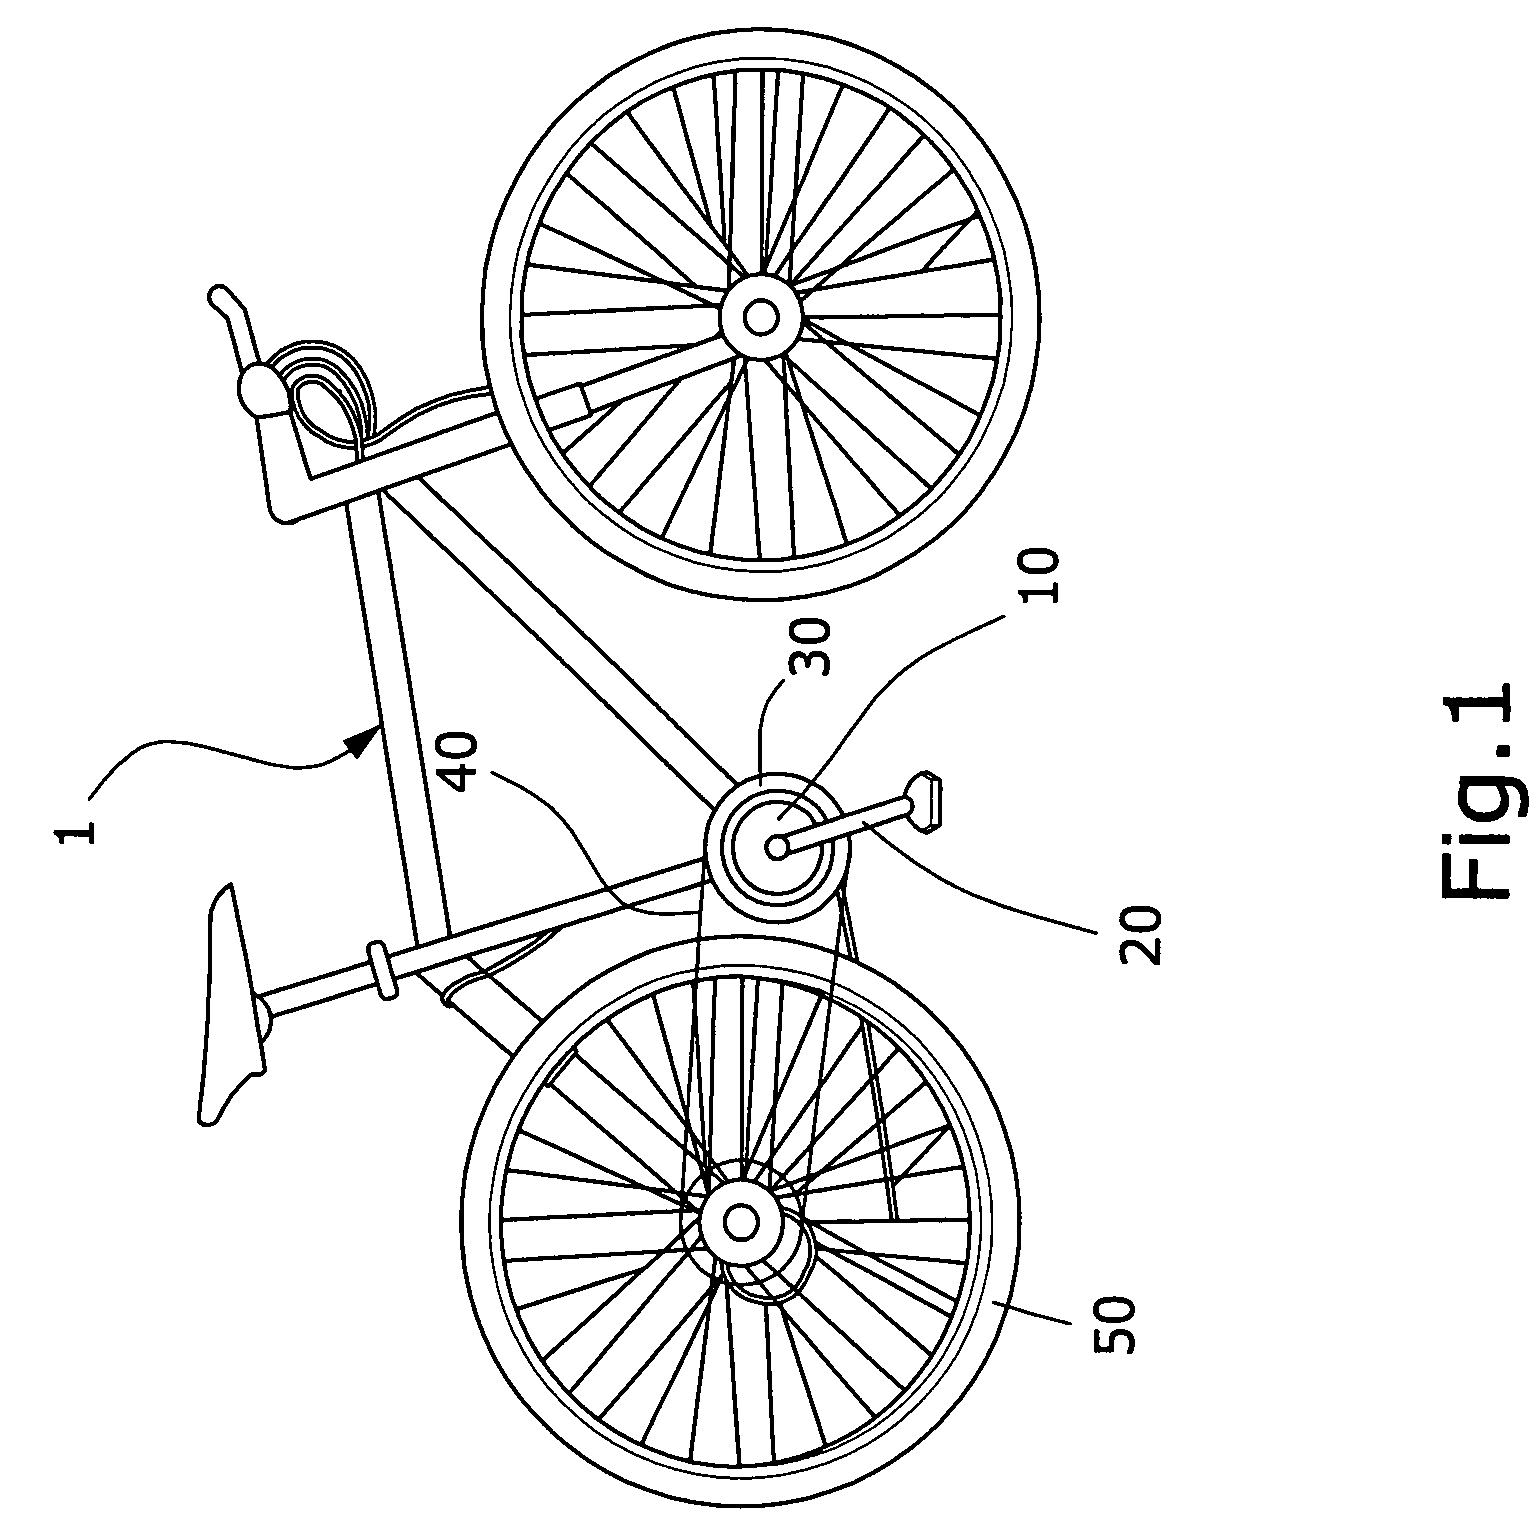 Transmission structure for an electrically operated bicycle